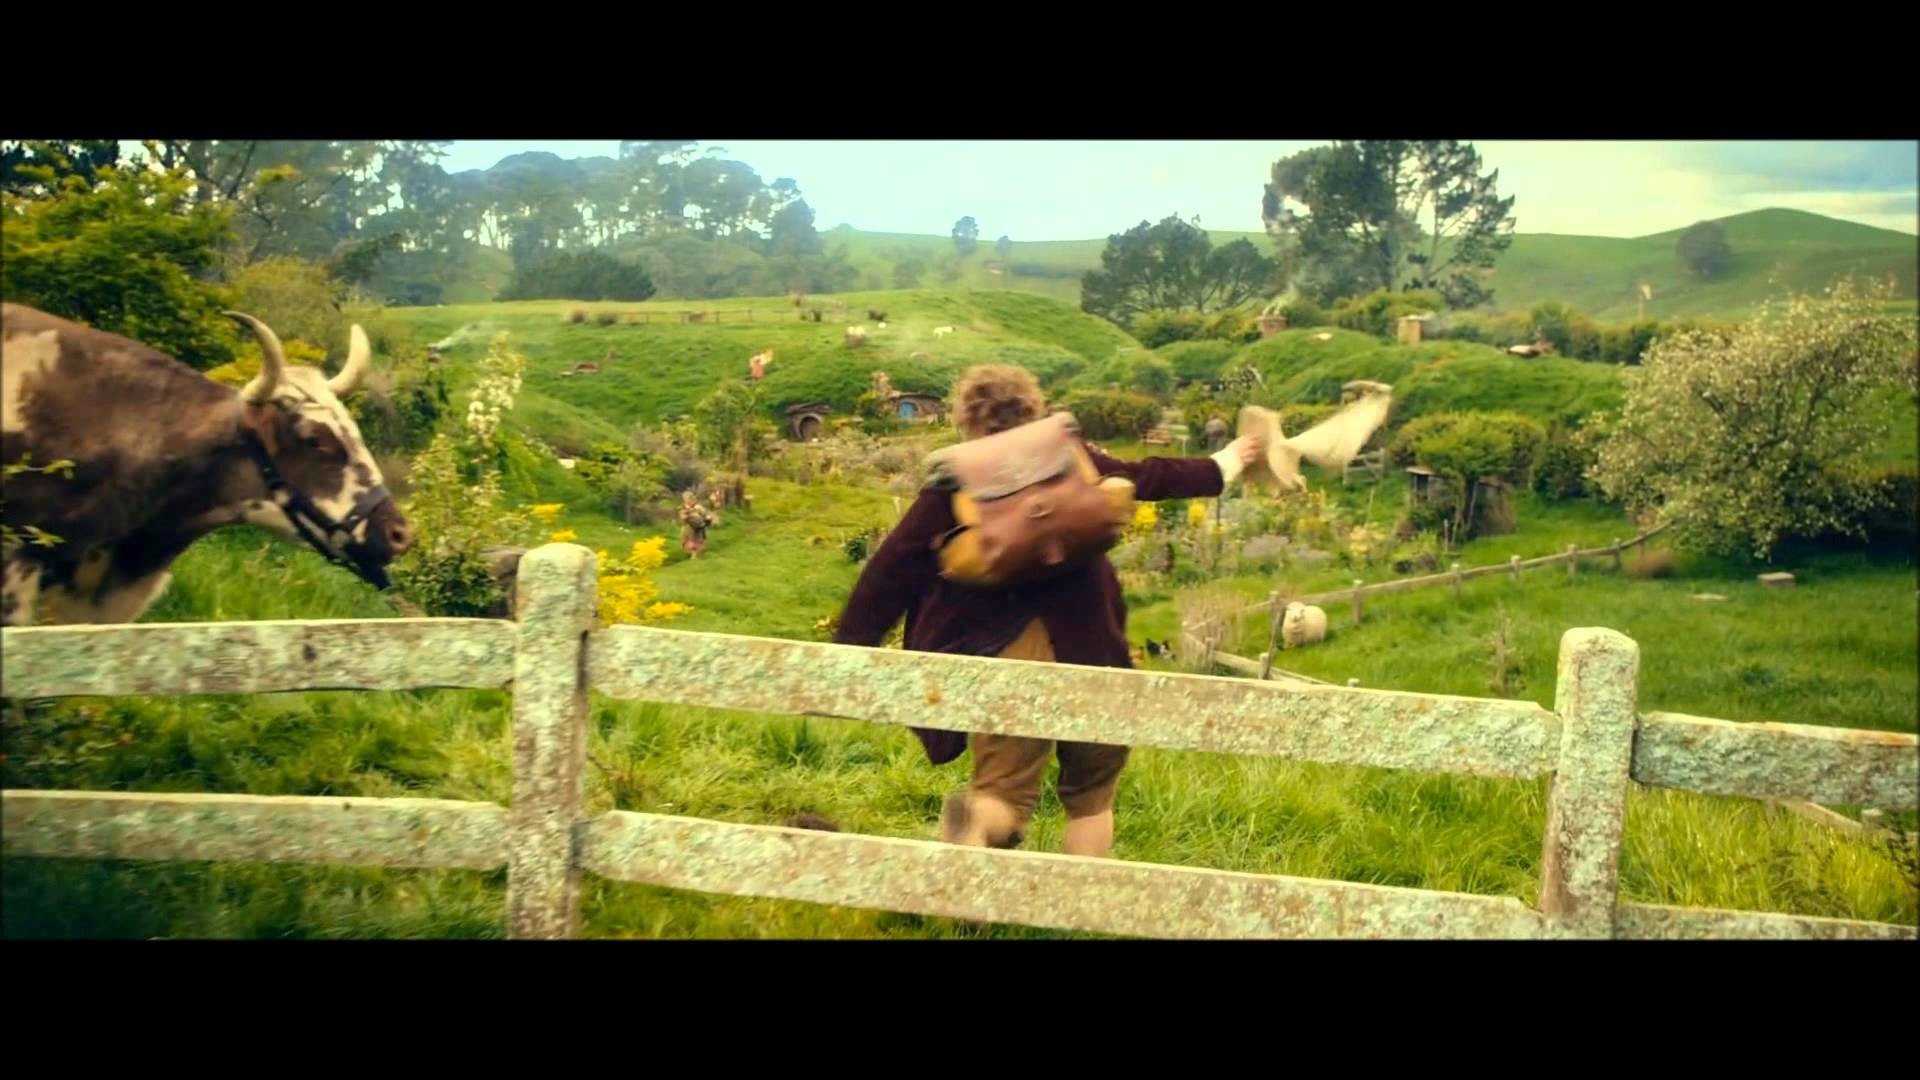 1920x1080 The Hobbit: An Unexpected Journey - Bilbo running through the Shire -  YouTube